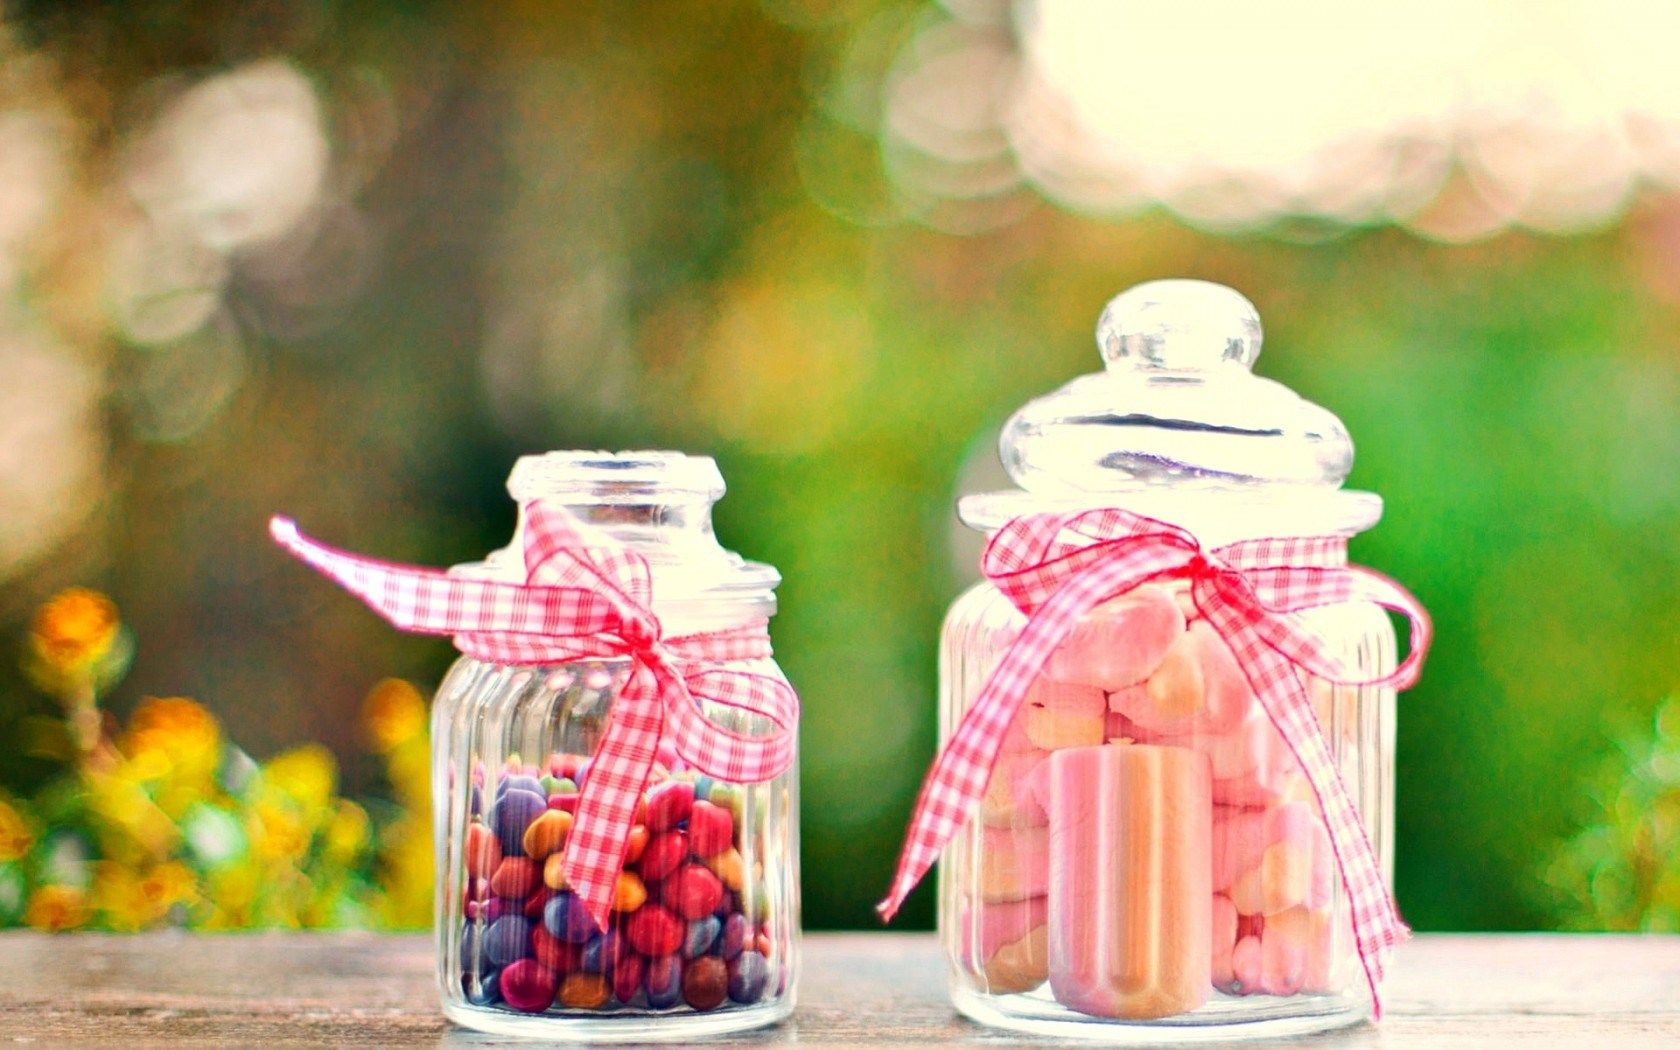 Two jars with candy and candles in them - Marshmallows